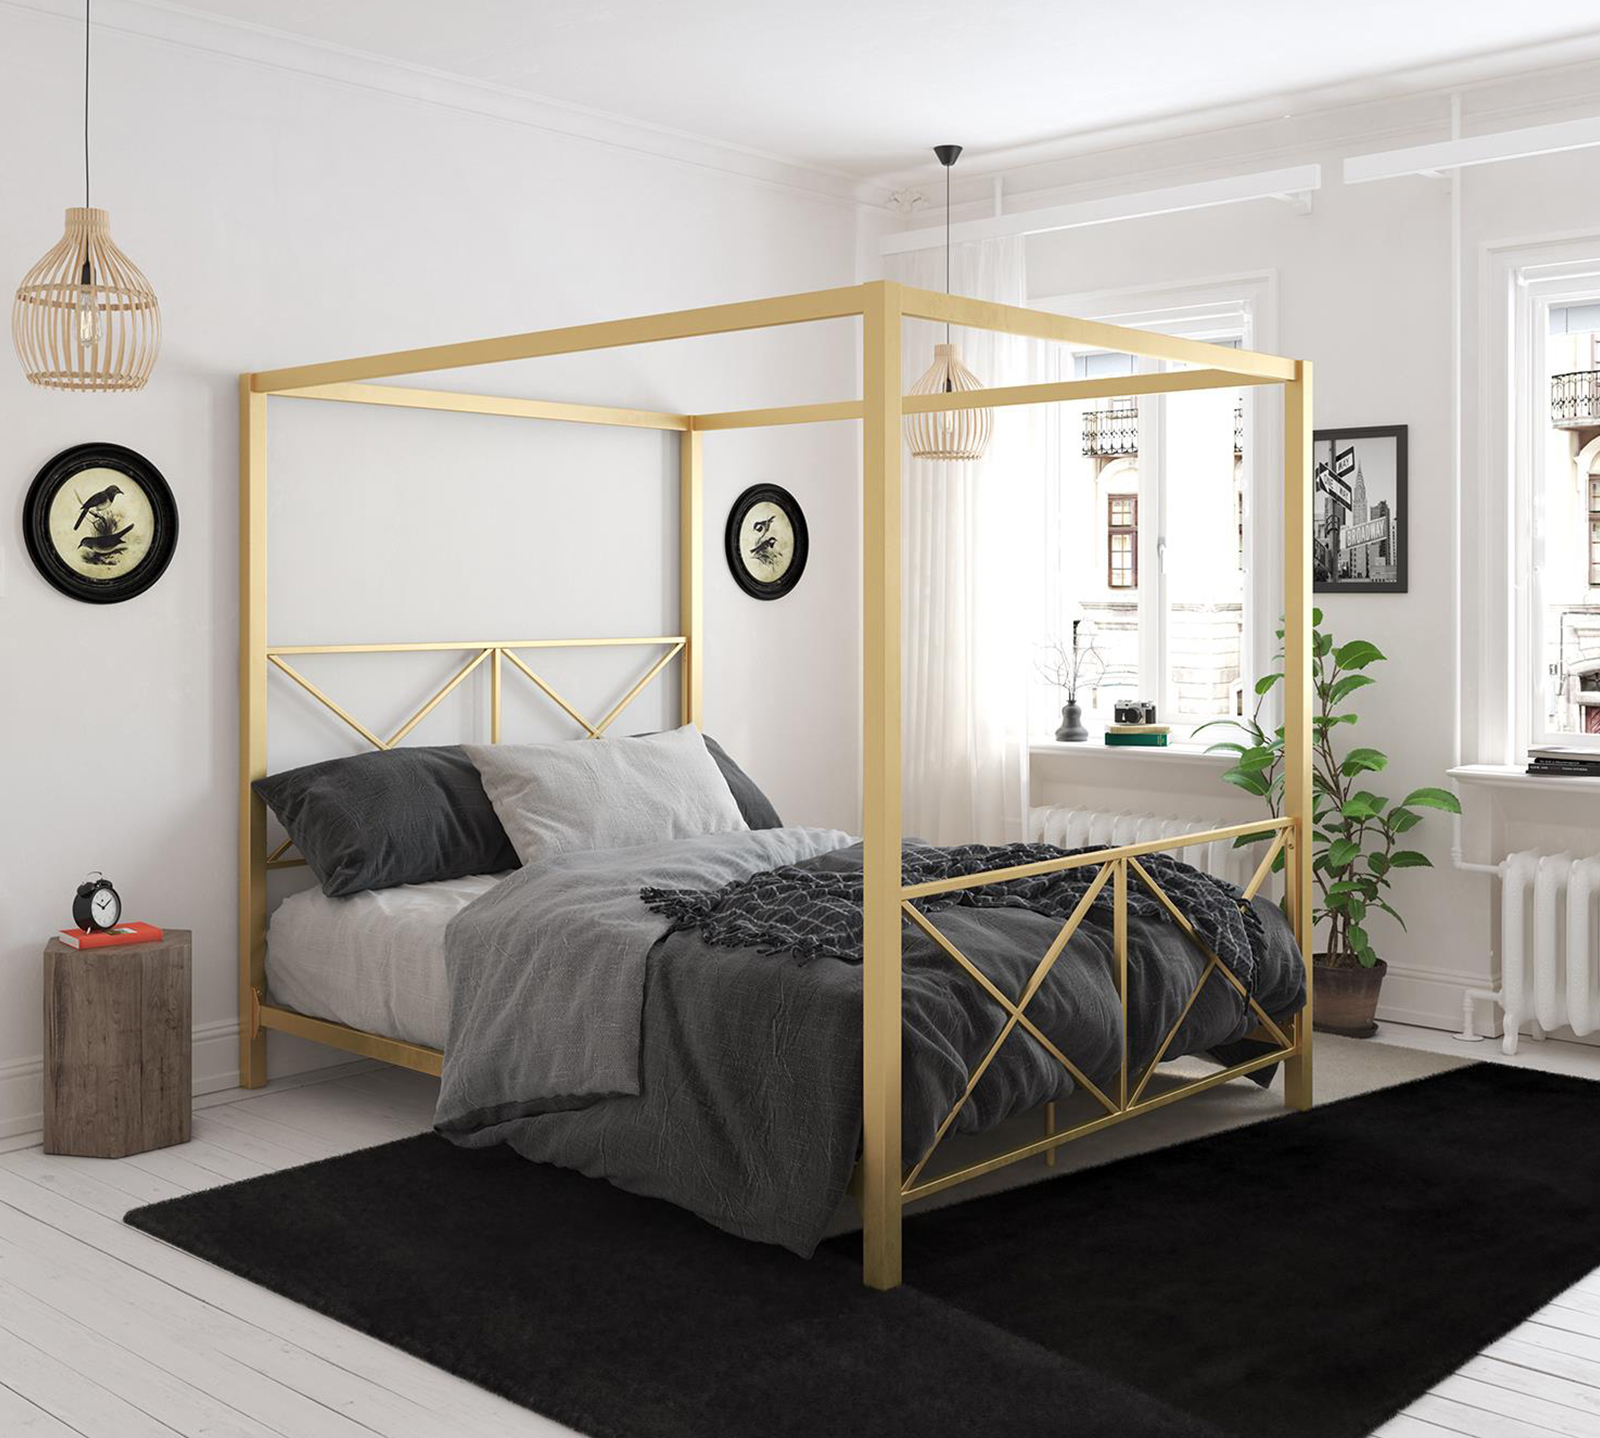 Atwater Living Canopy Bed | Full | Gold | Reese